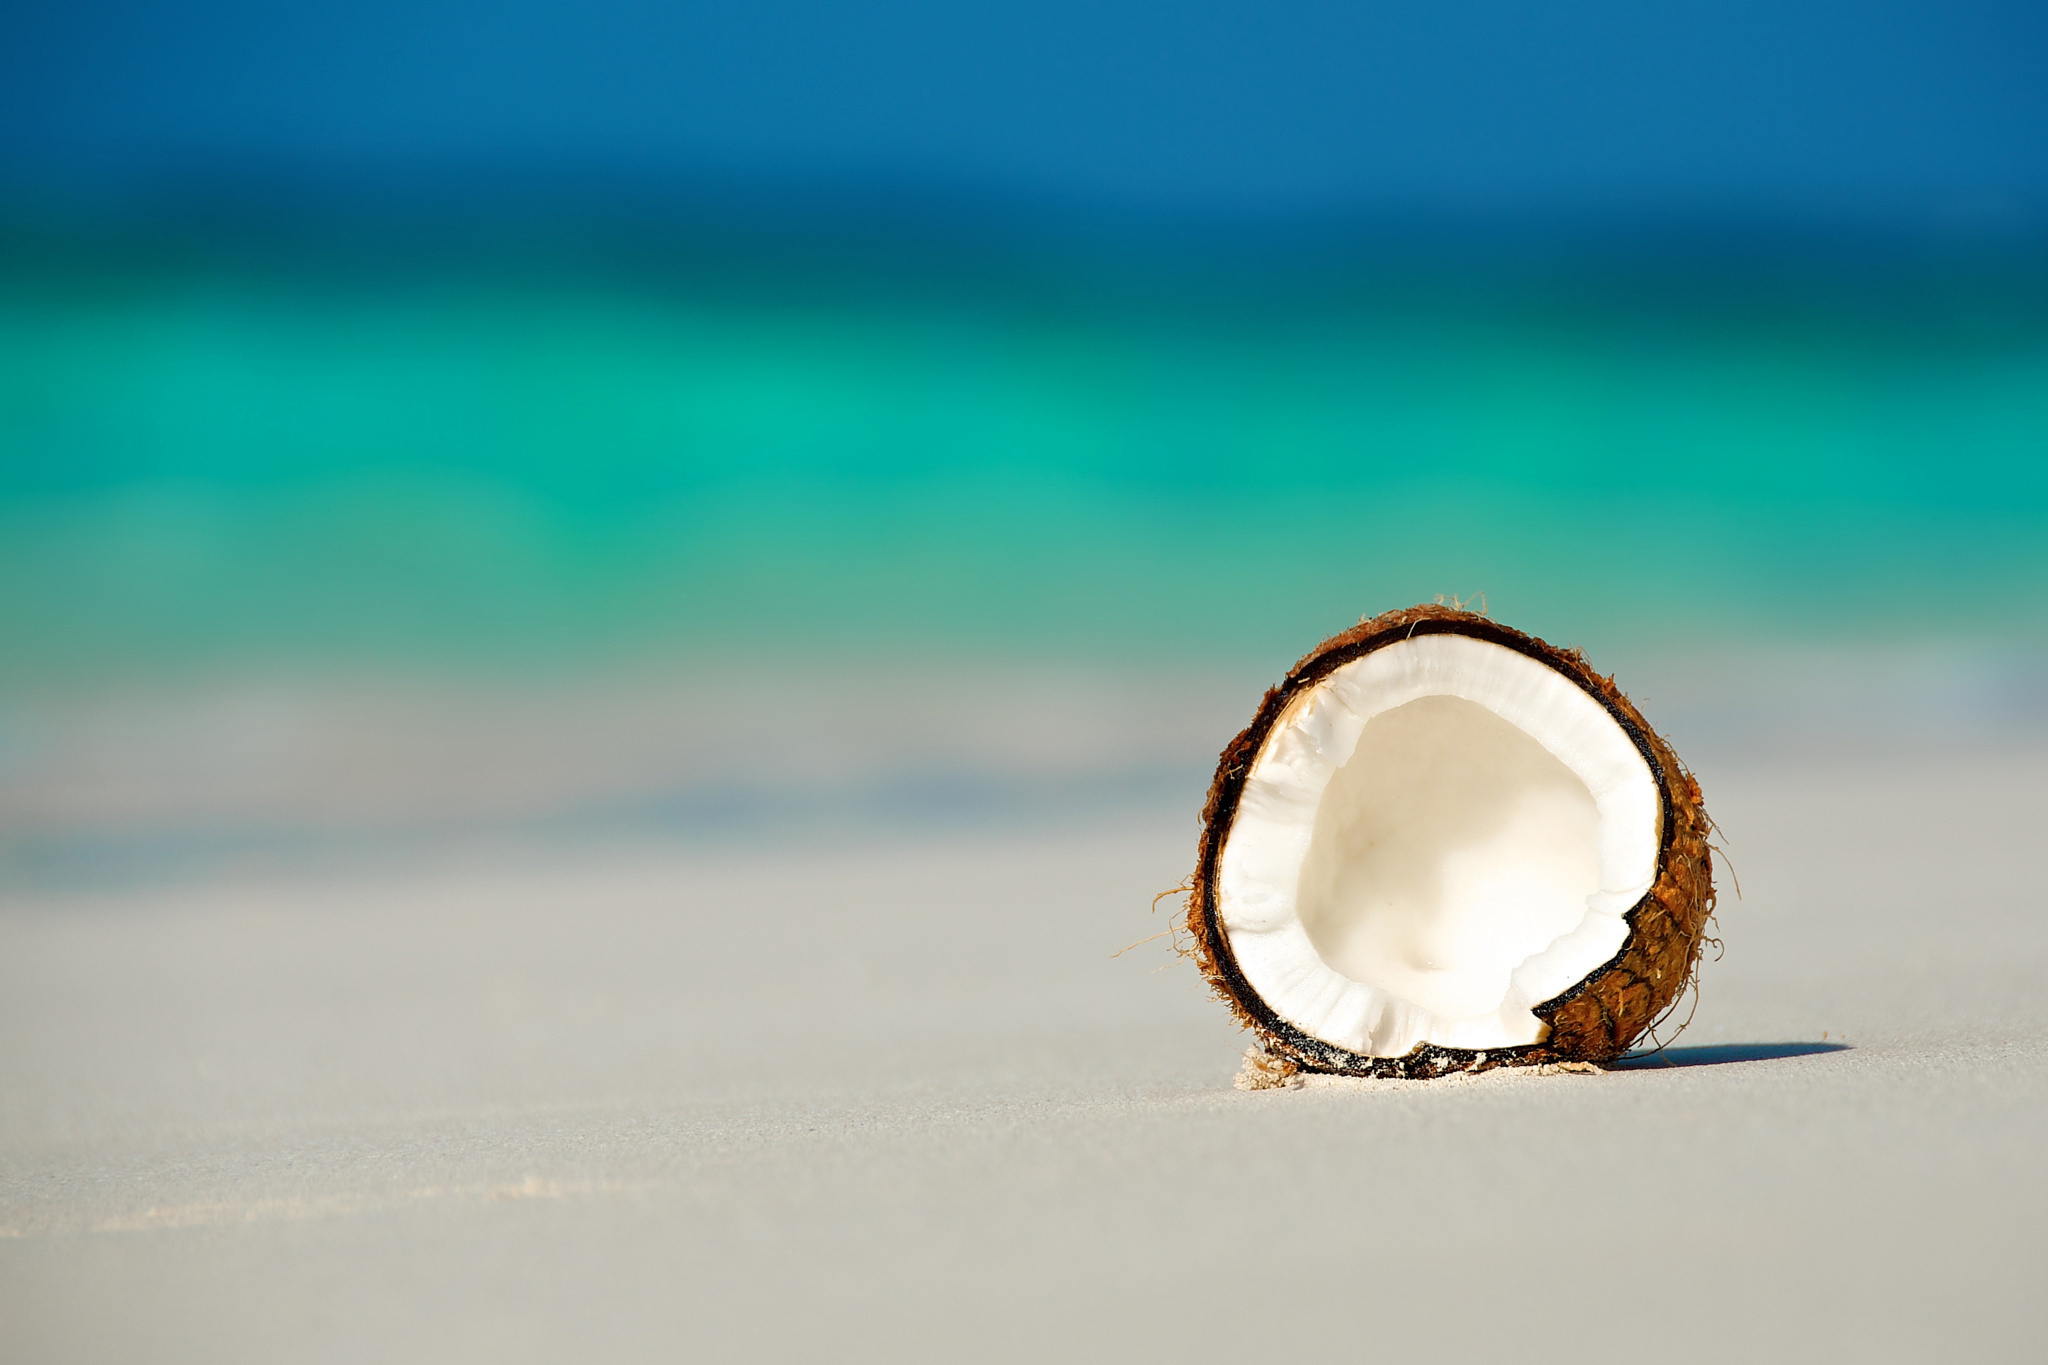 Coconut: A large fruit like a nut with a thick, hard, brown shell covered in fiber. 2050x1370 HD Wallpaper.